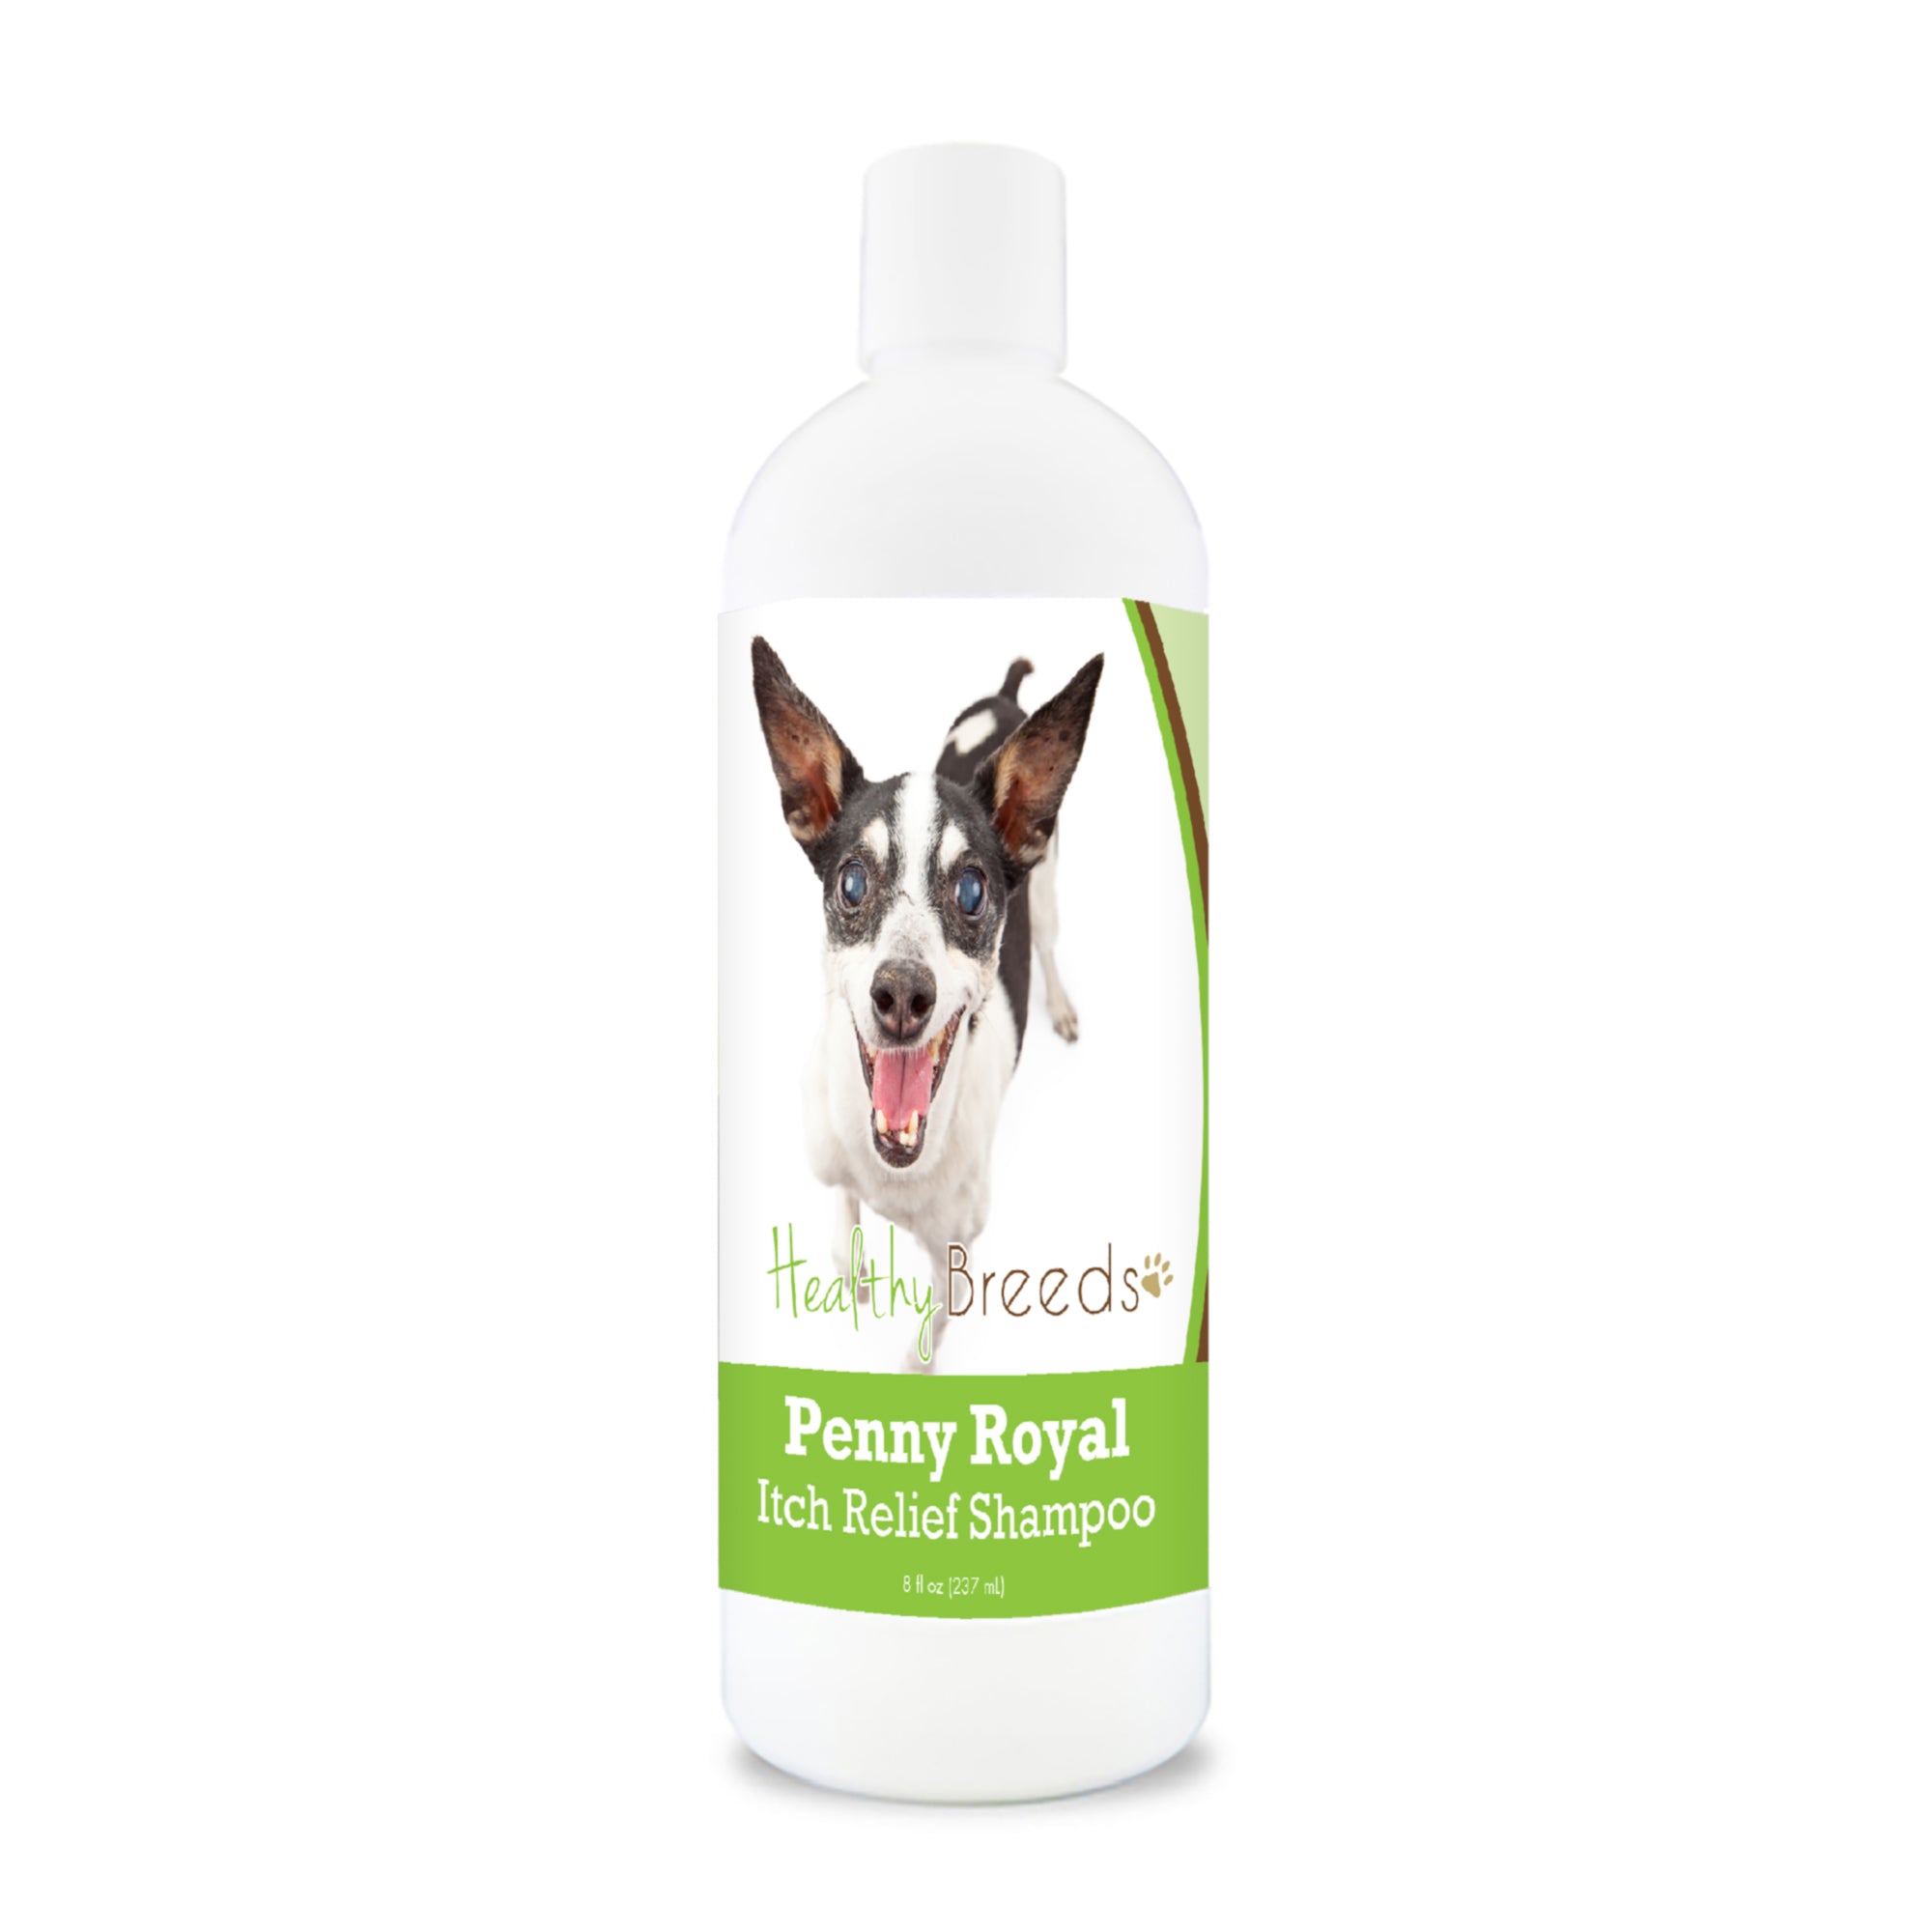 Rat Terrier Penny Royal Itch Relief Shampoo 8 oz